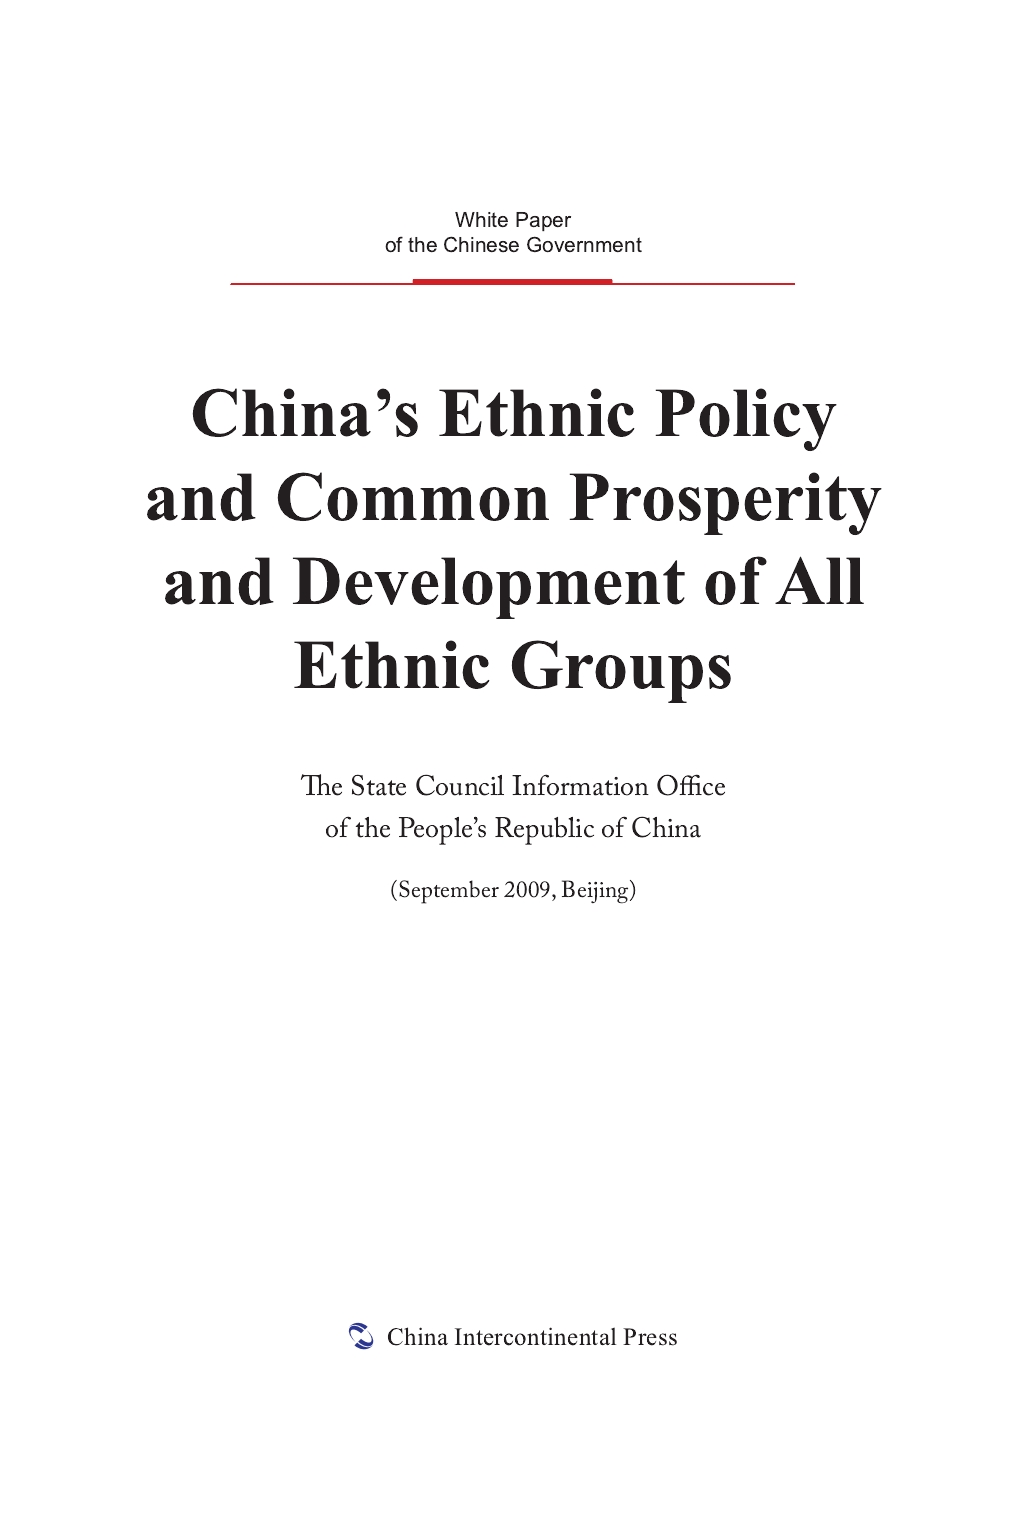 China's Ethnic Policy and Common Prosperity and Development of All Ethnic Groups